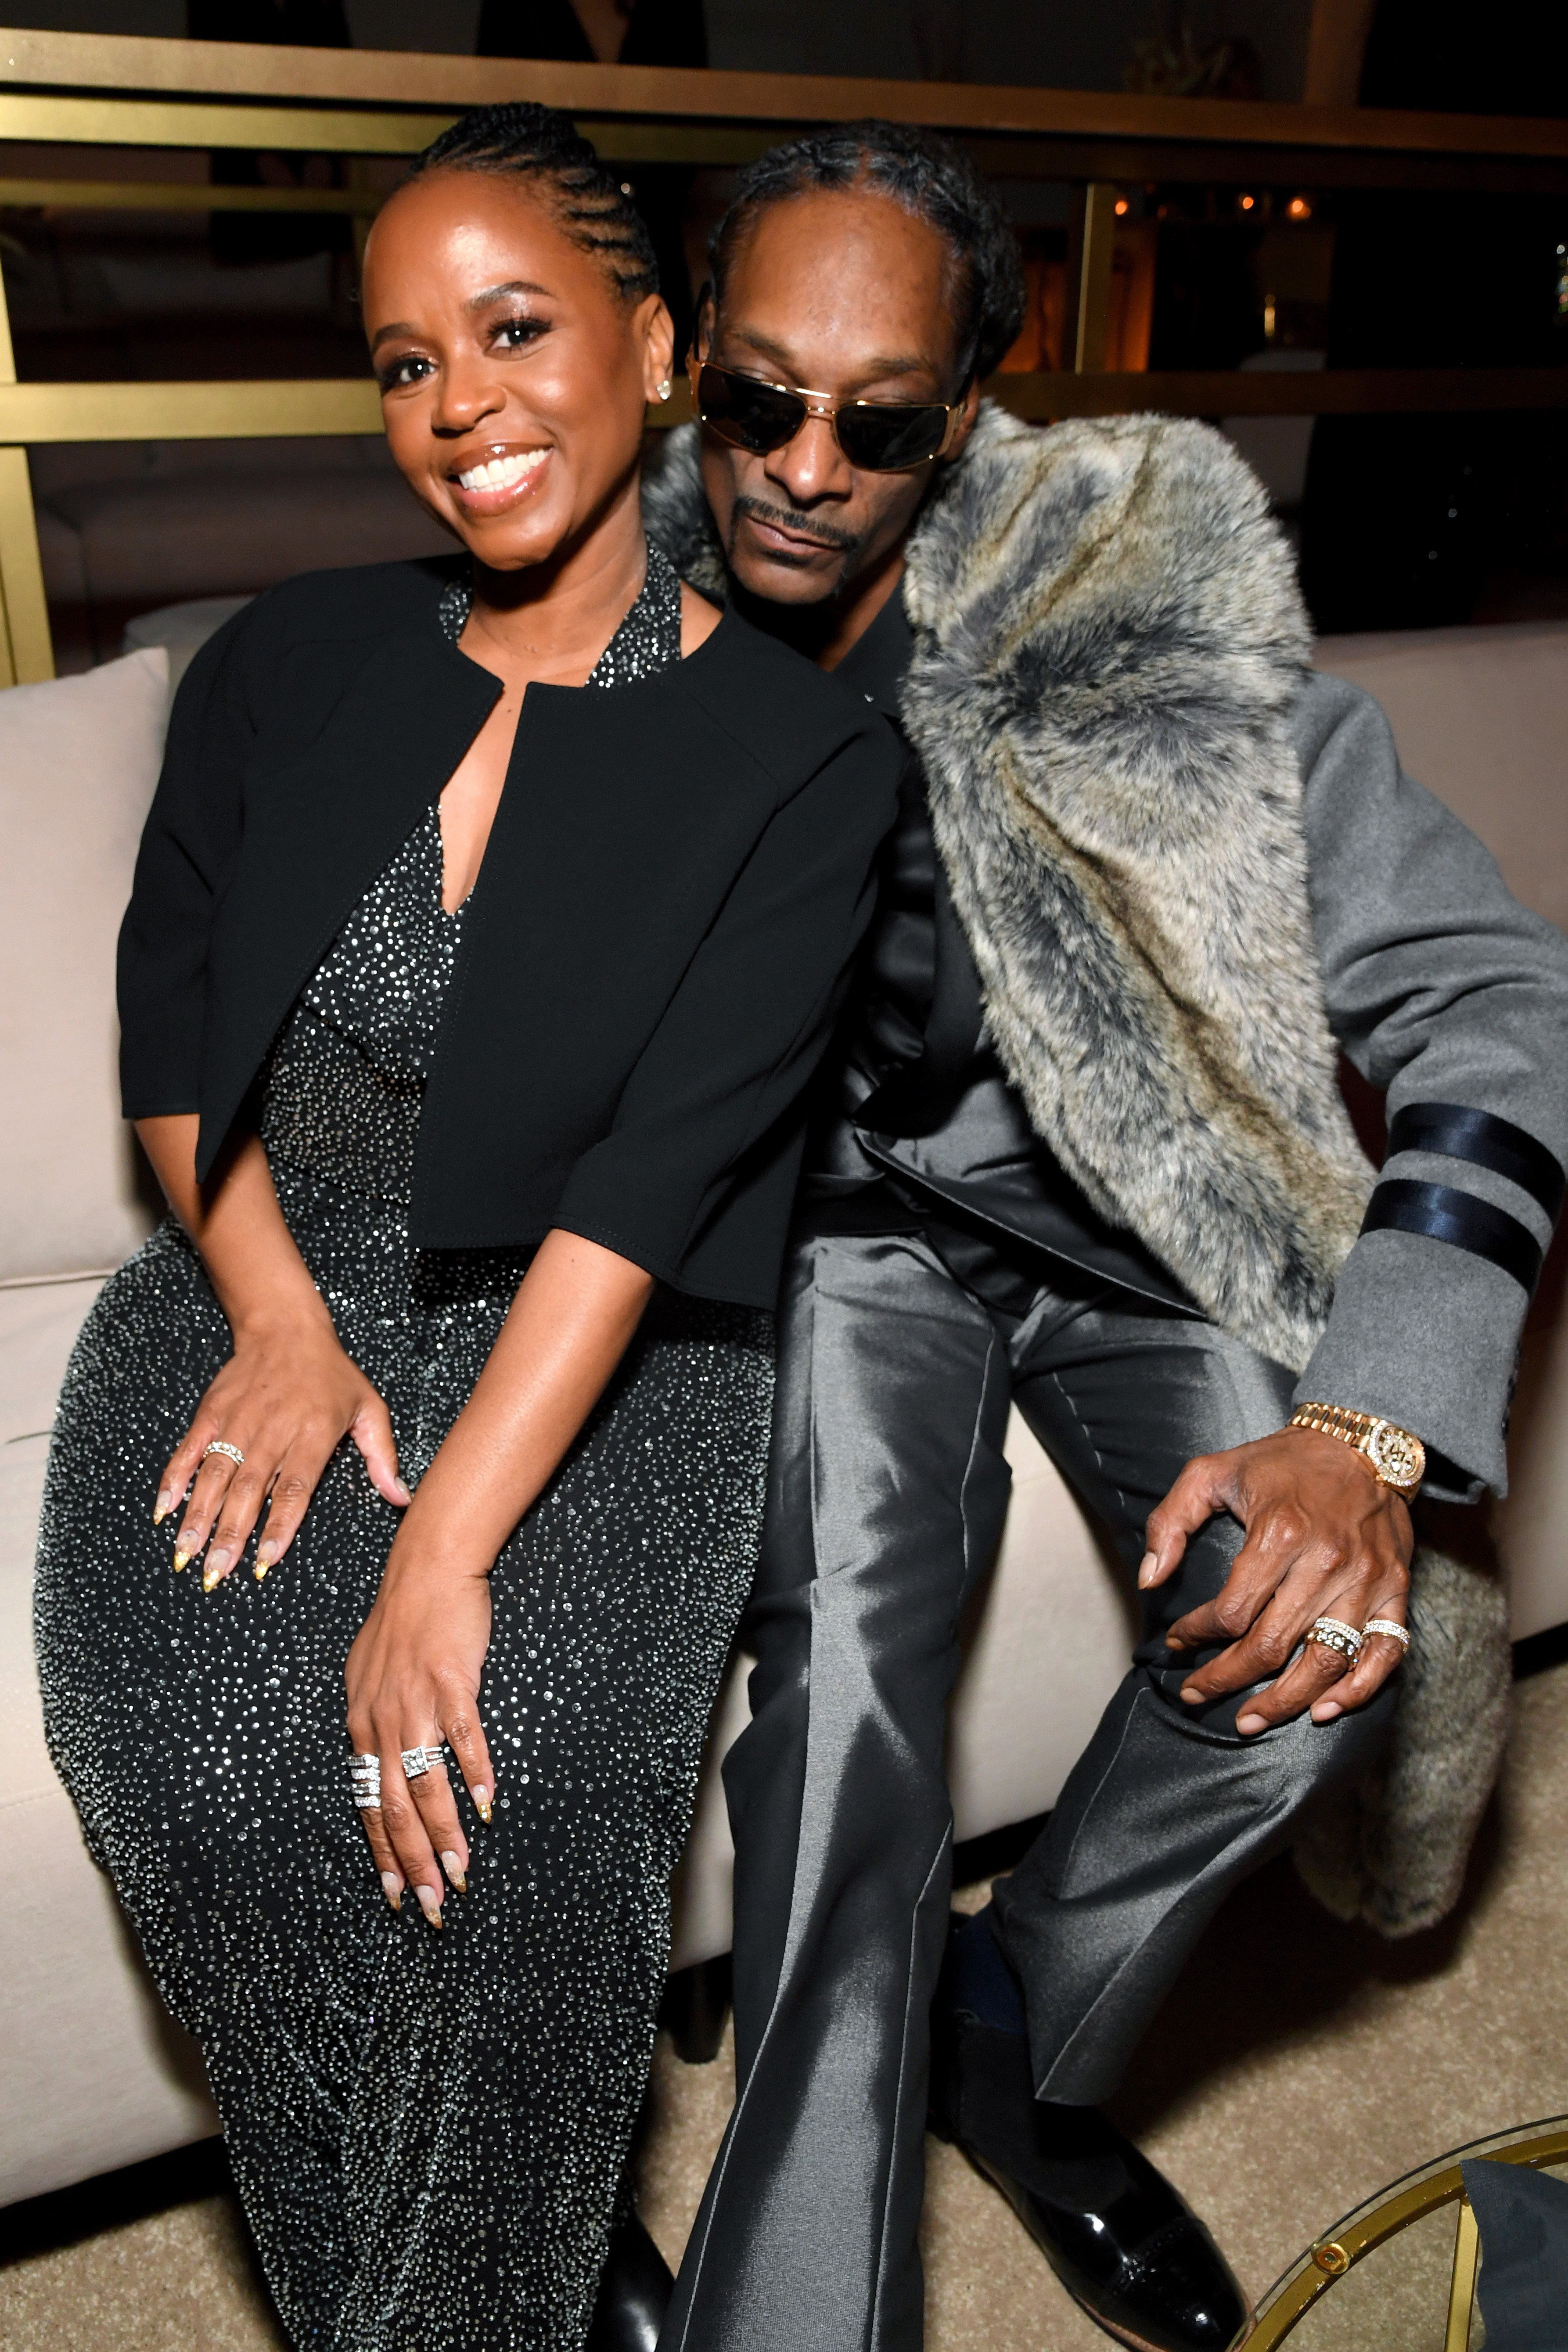  Shante Broadus and Snoop Dogg attend Sean Combs 50th Birthday Bash presented by Ciroc Vodka on December 14, 2019 | Photo: GettyImages